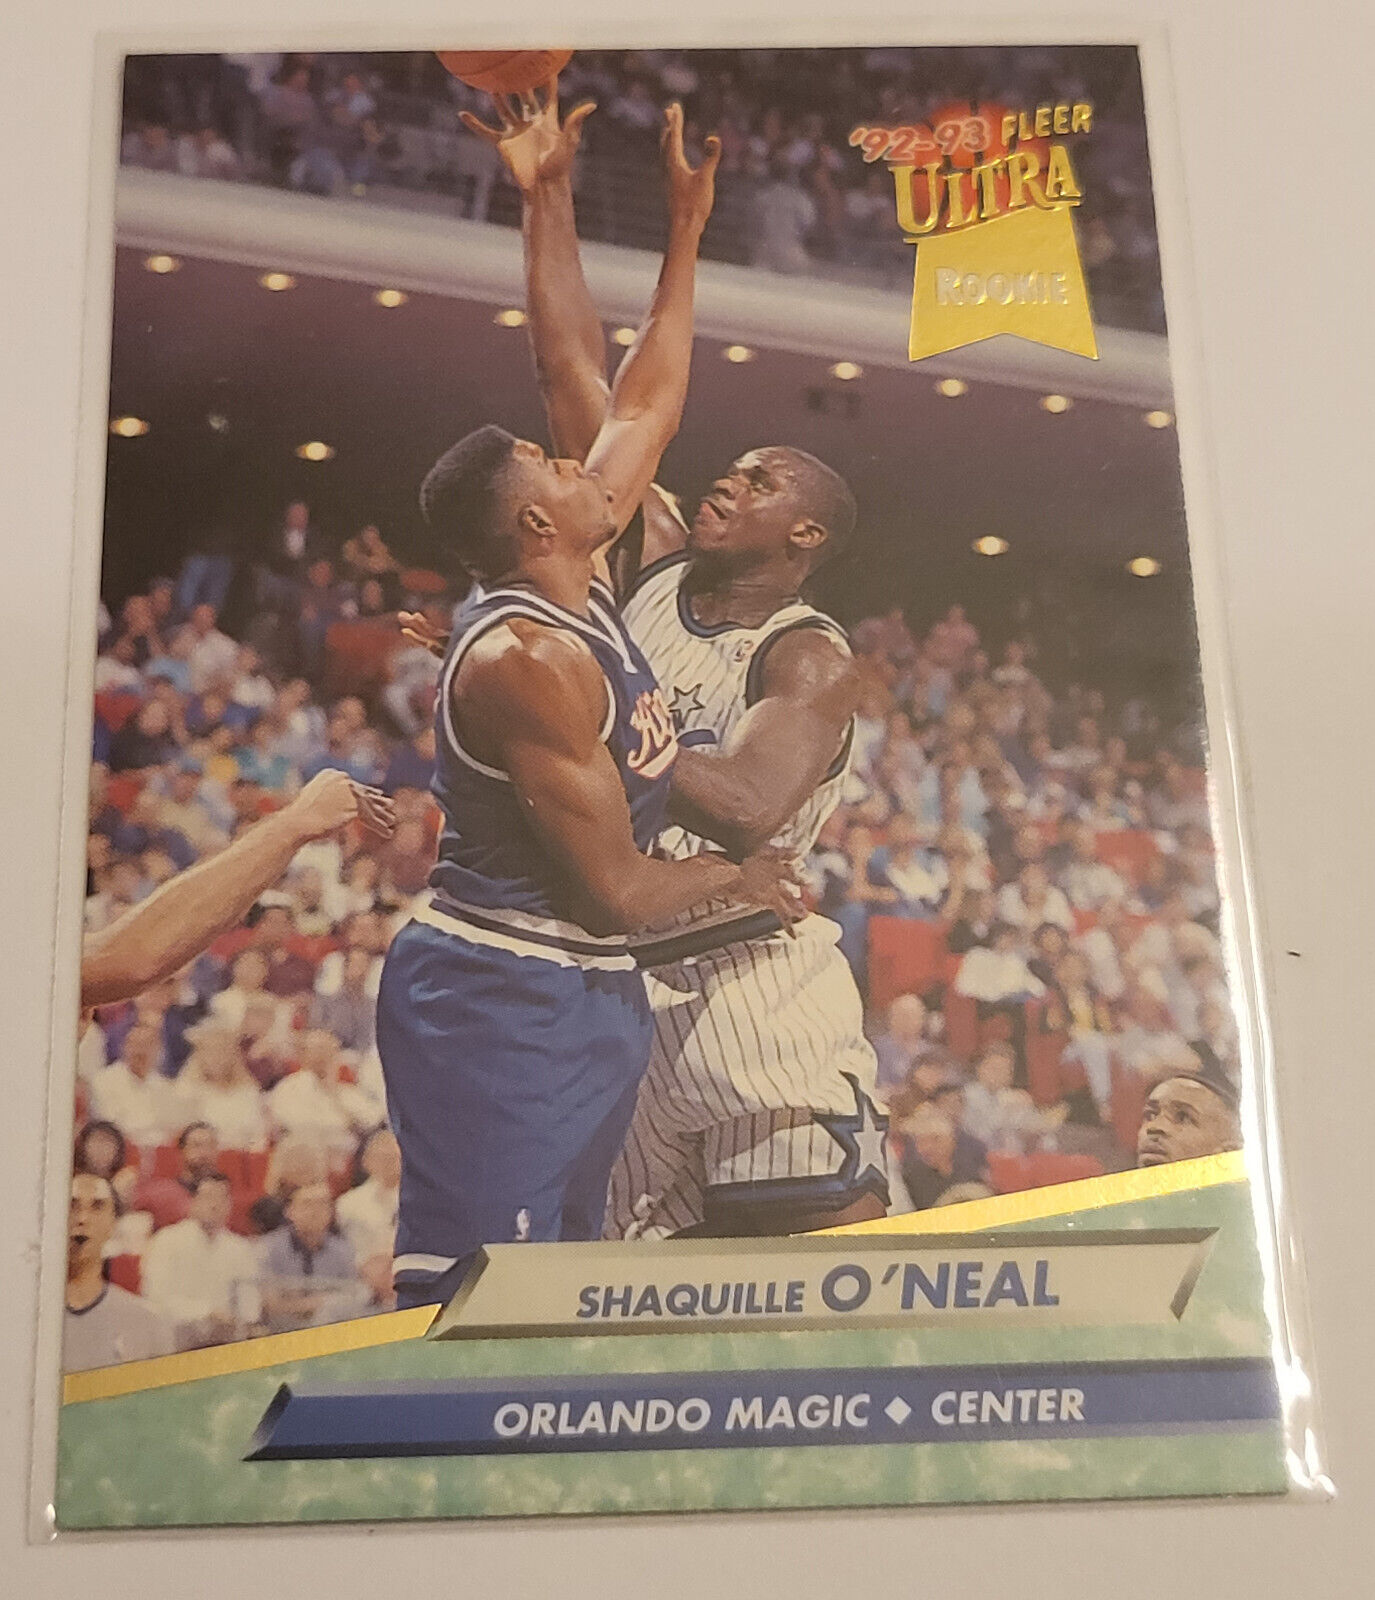 1992-1993 FLEER ULTRA ROOKIE CARD SHAQUILLE O'NEAL #328. rookie card picture